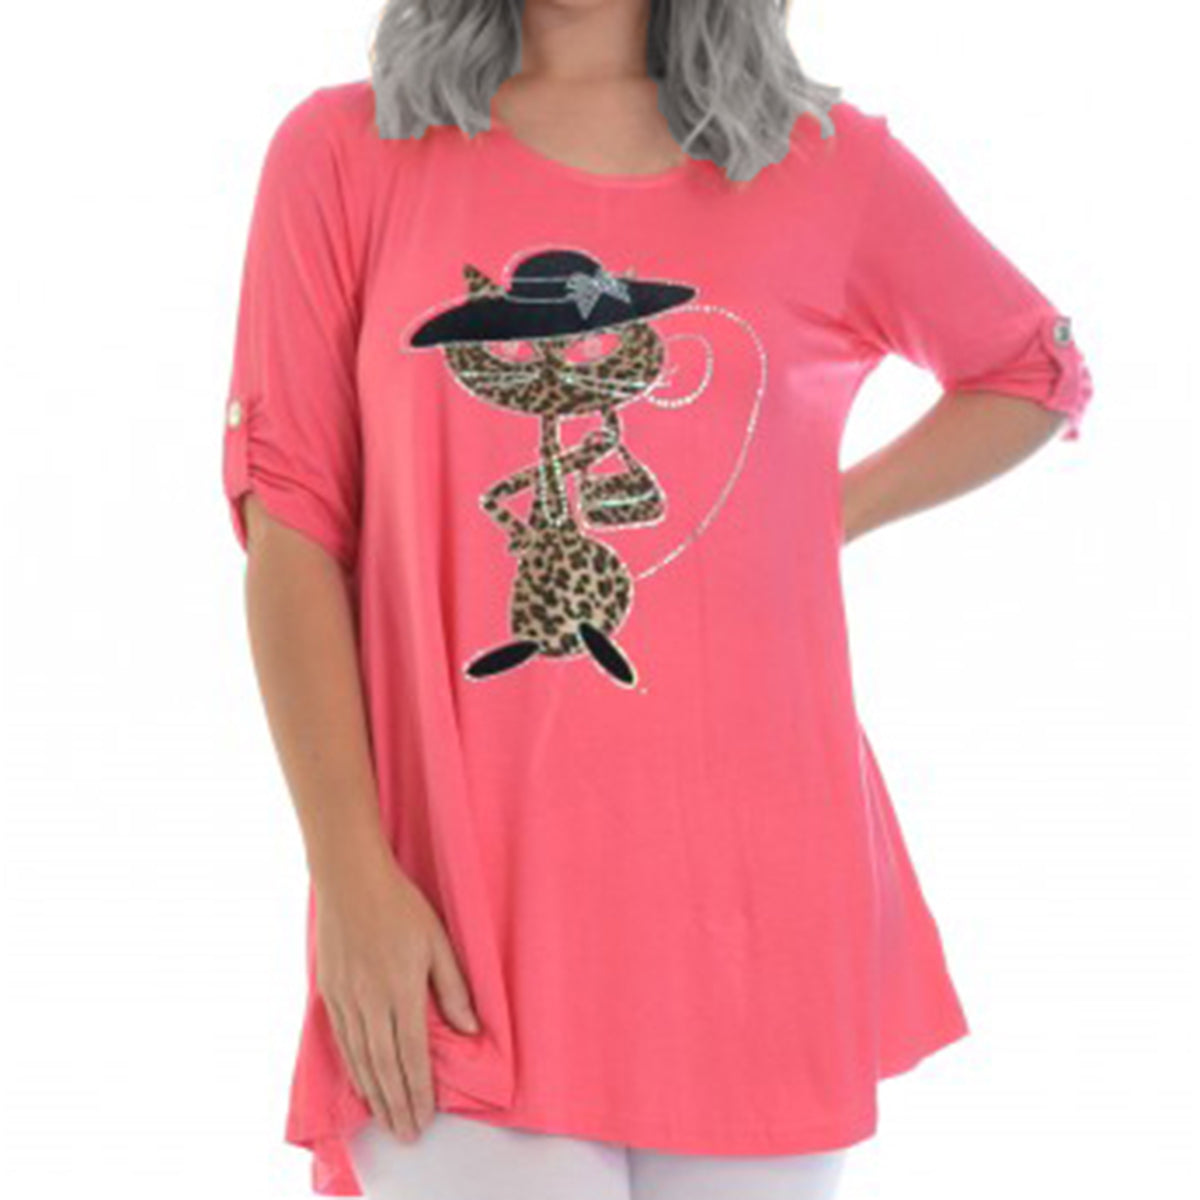 CAT IN A HAT BUTTON SLEEVE SWING TOP